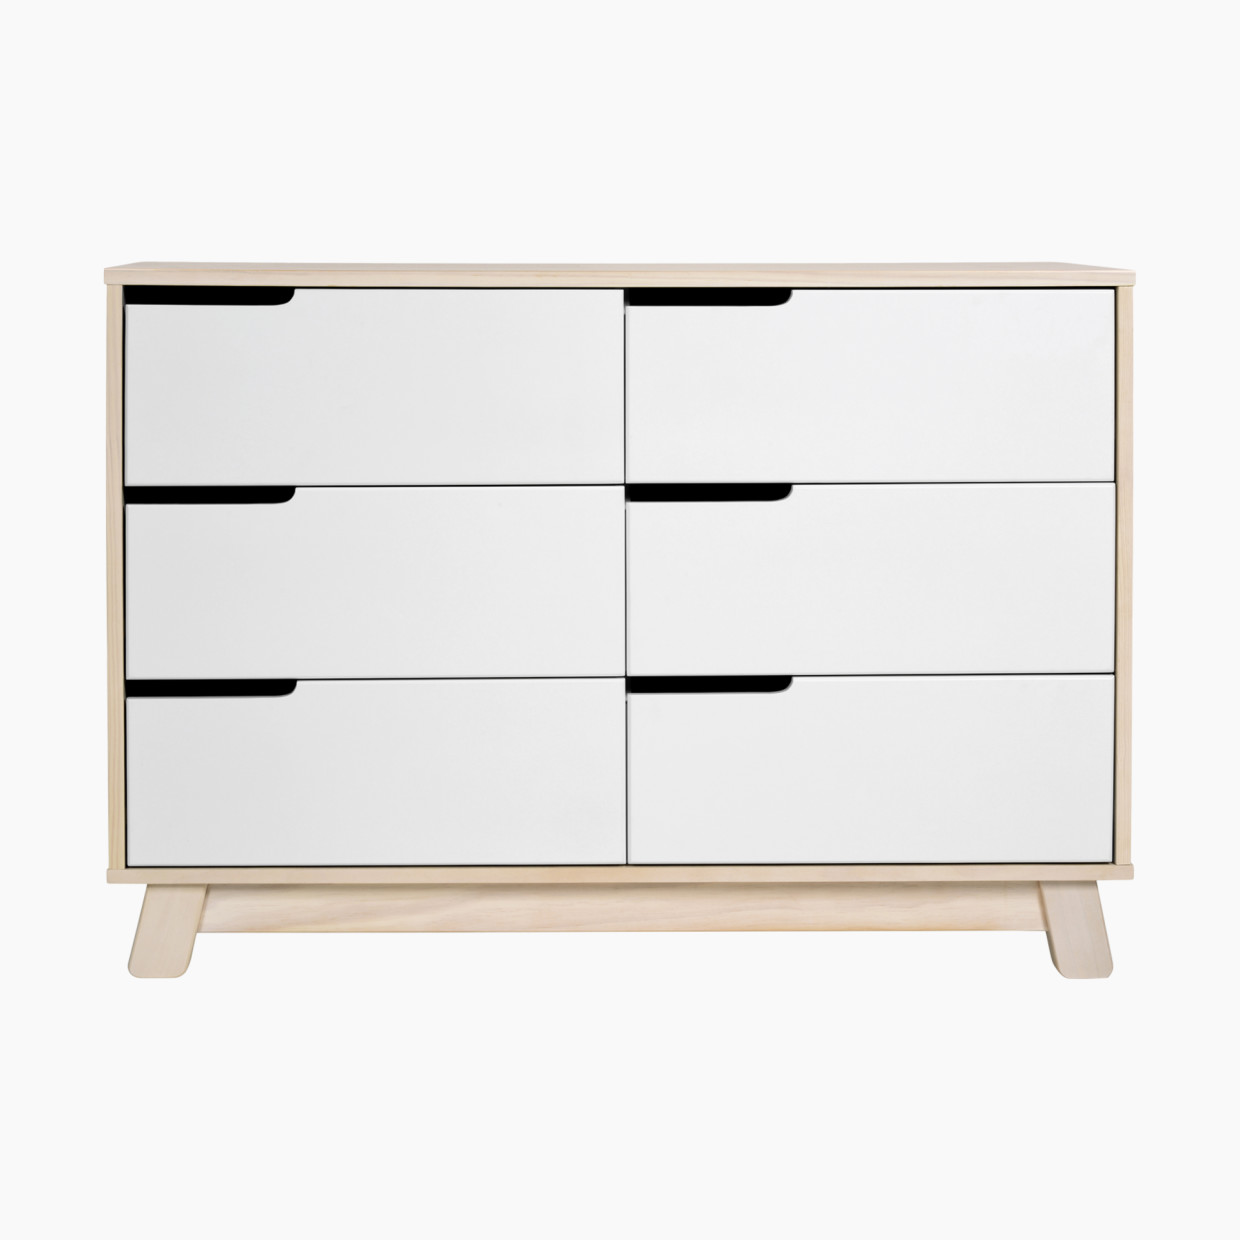 babyletto Hudson 6-Drawer Double Dresser - Washed Natural / White.